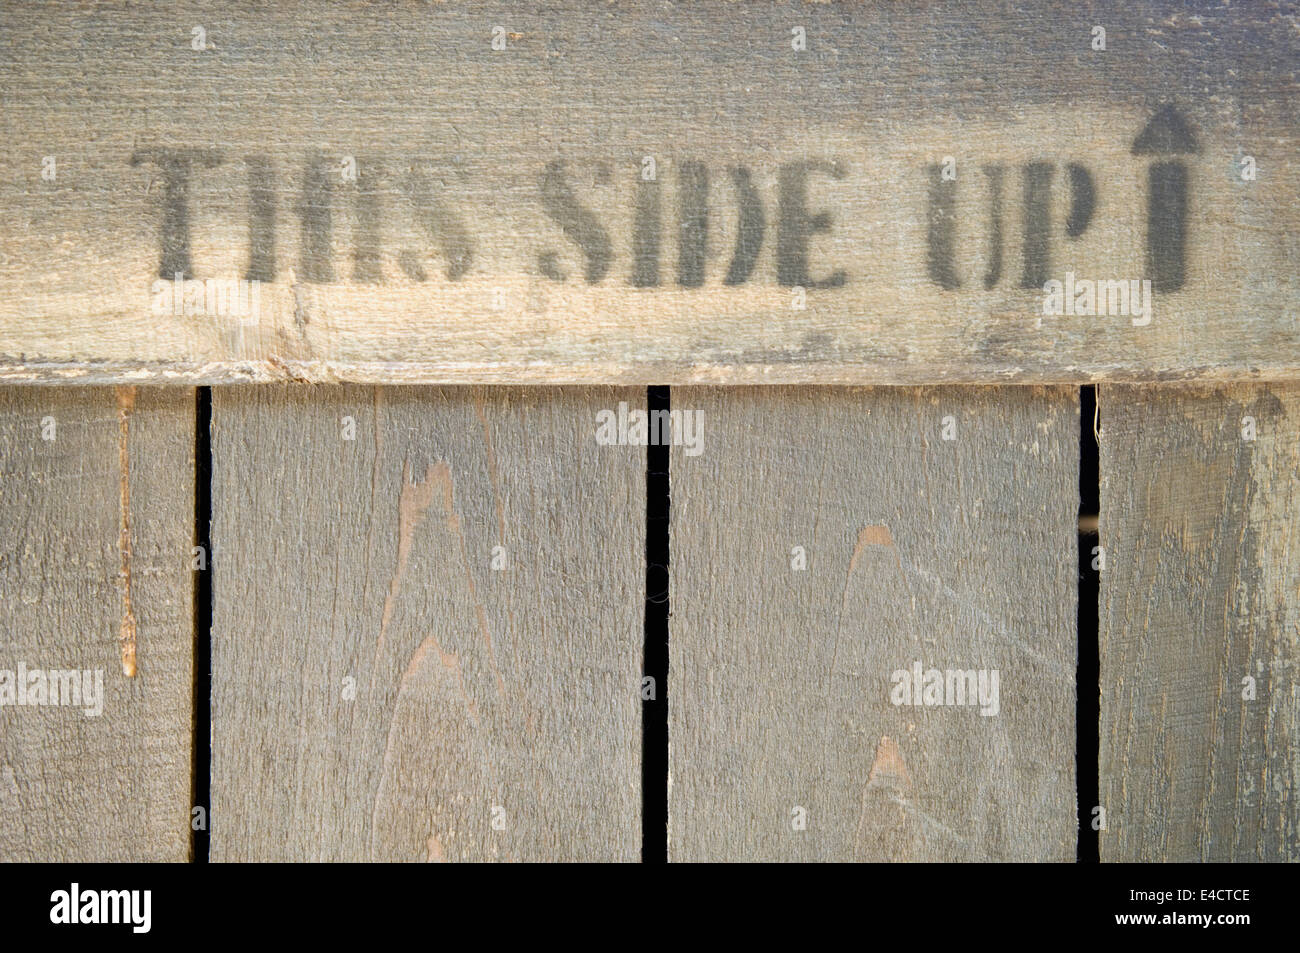 This Side Up Stencilled on Wooden Crate at the Louisville Zoo in Kentucky Stock Photo